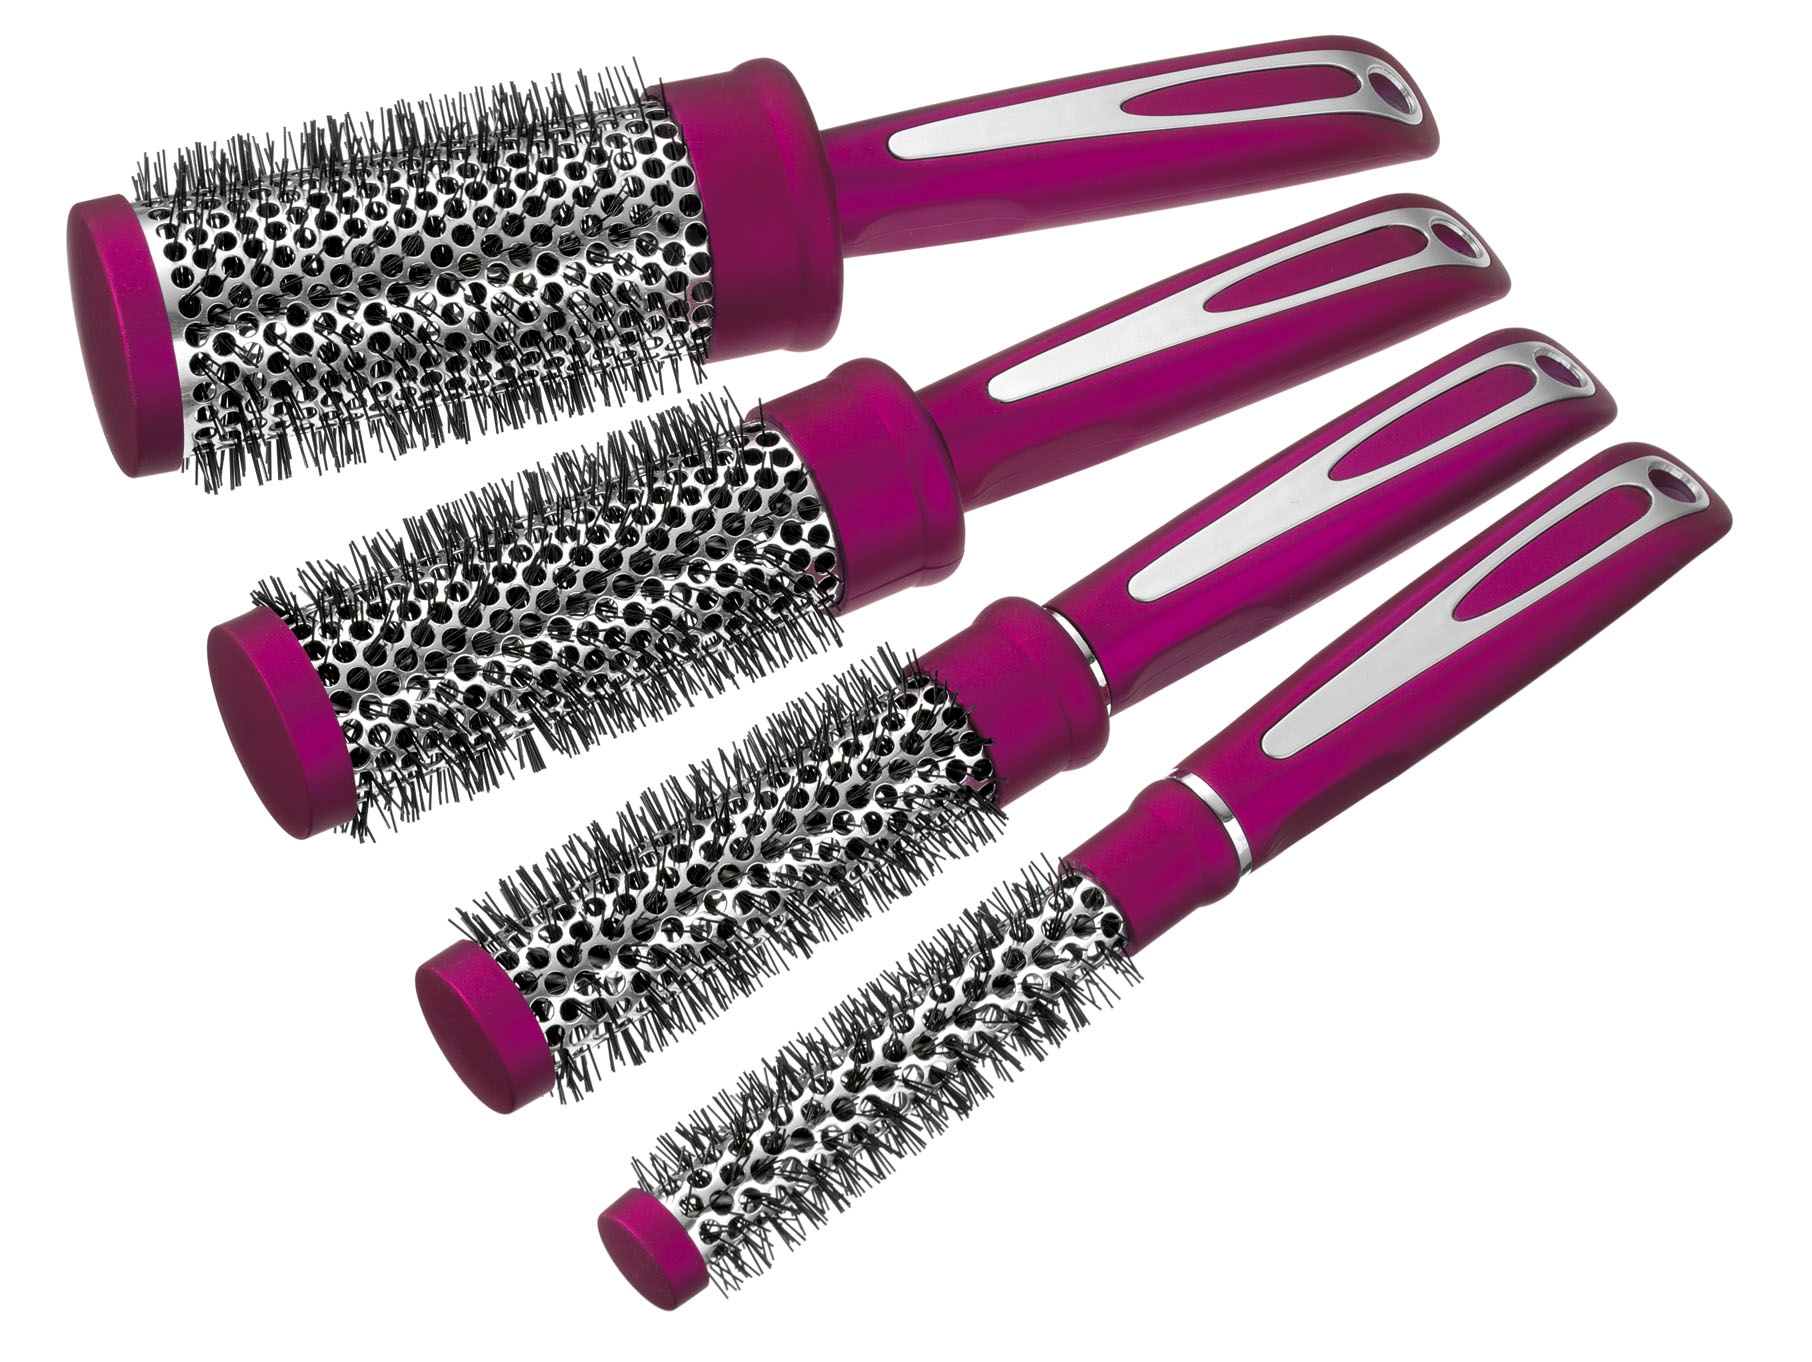 Round styler brush set (4), color Red.